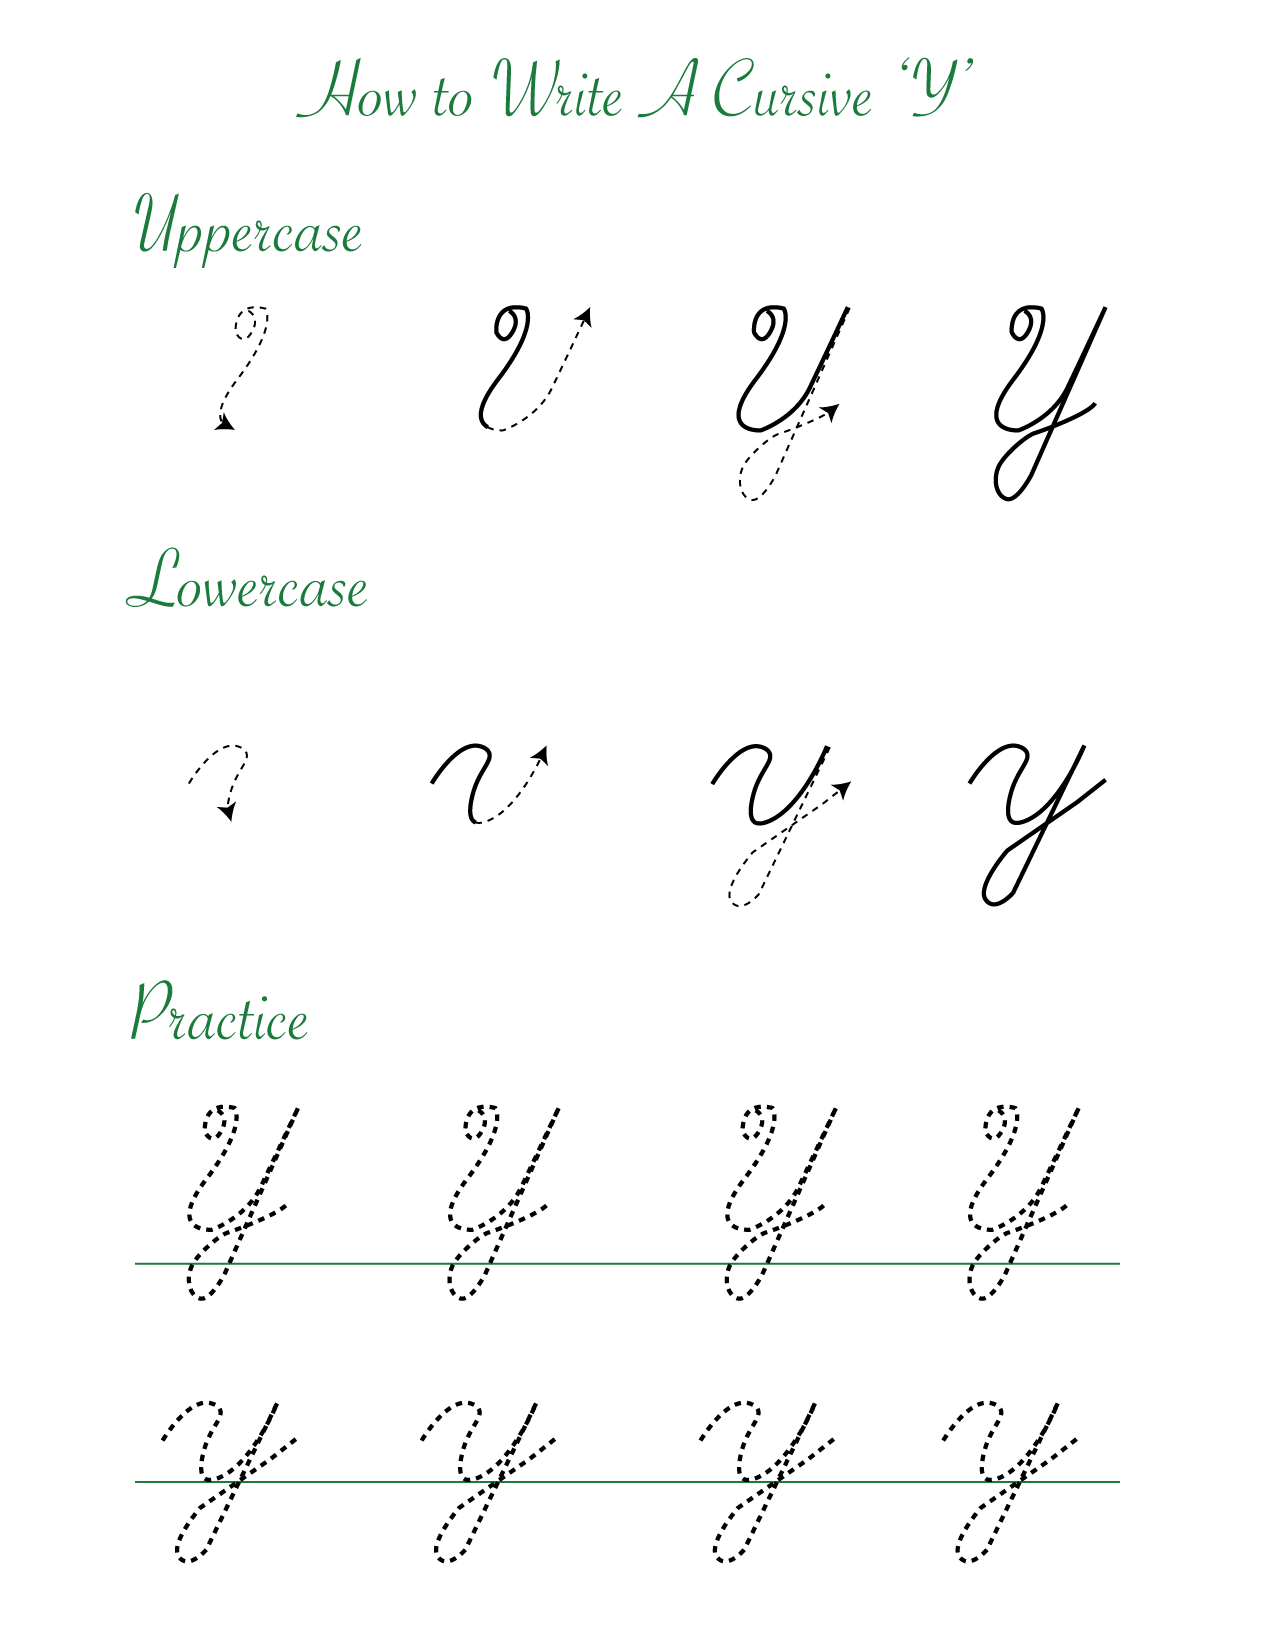 How to write a cursive Y